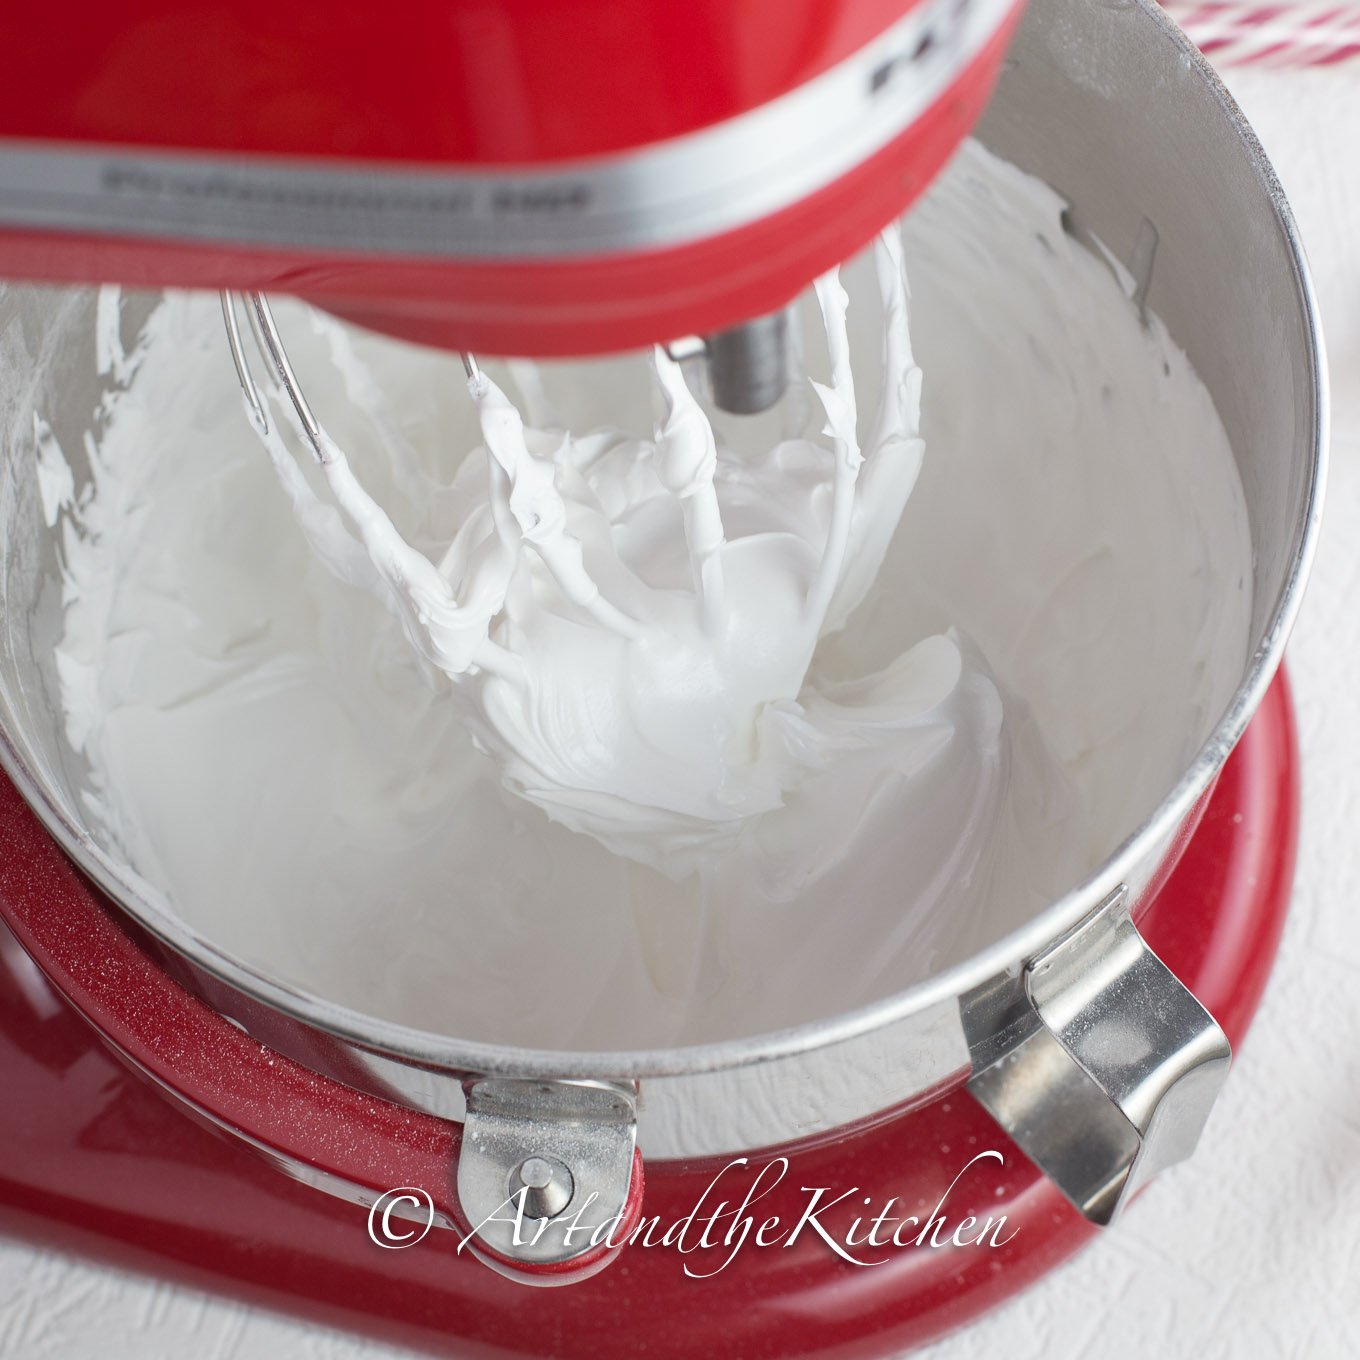 Red standing mixer with bowl filled with royal icing.